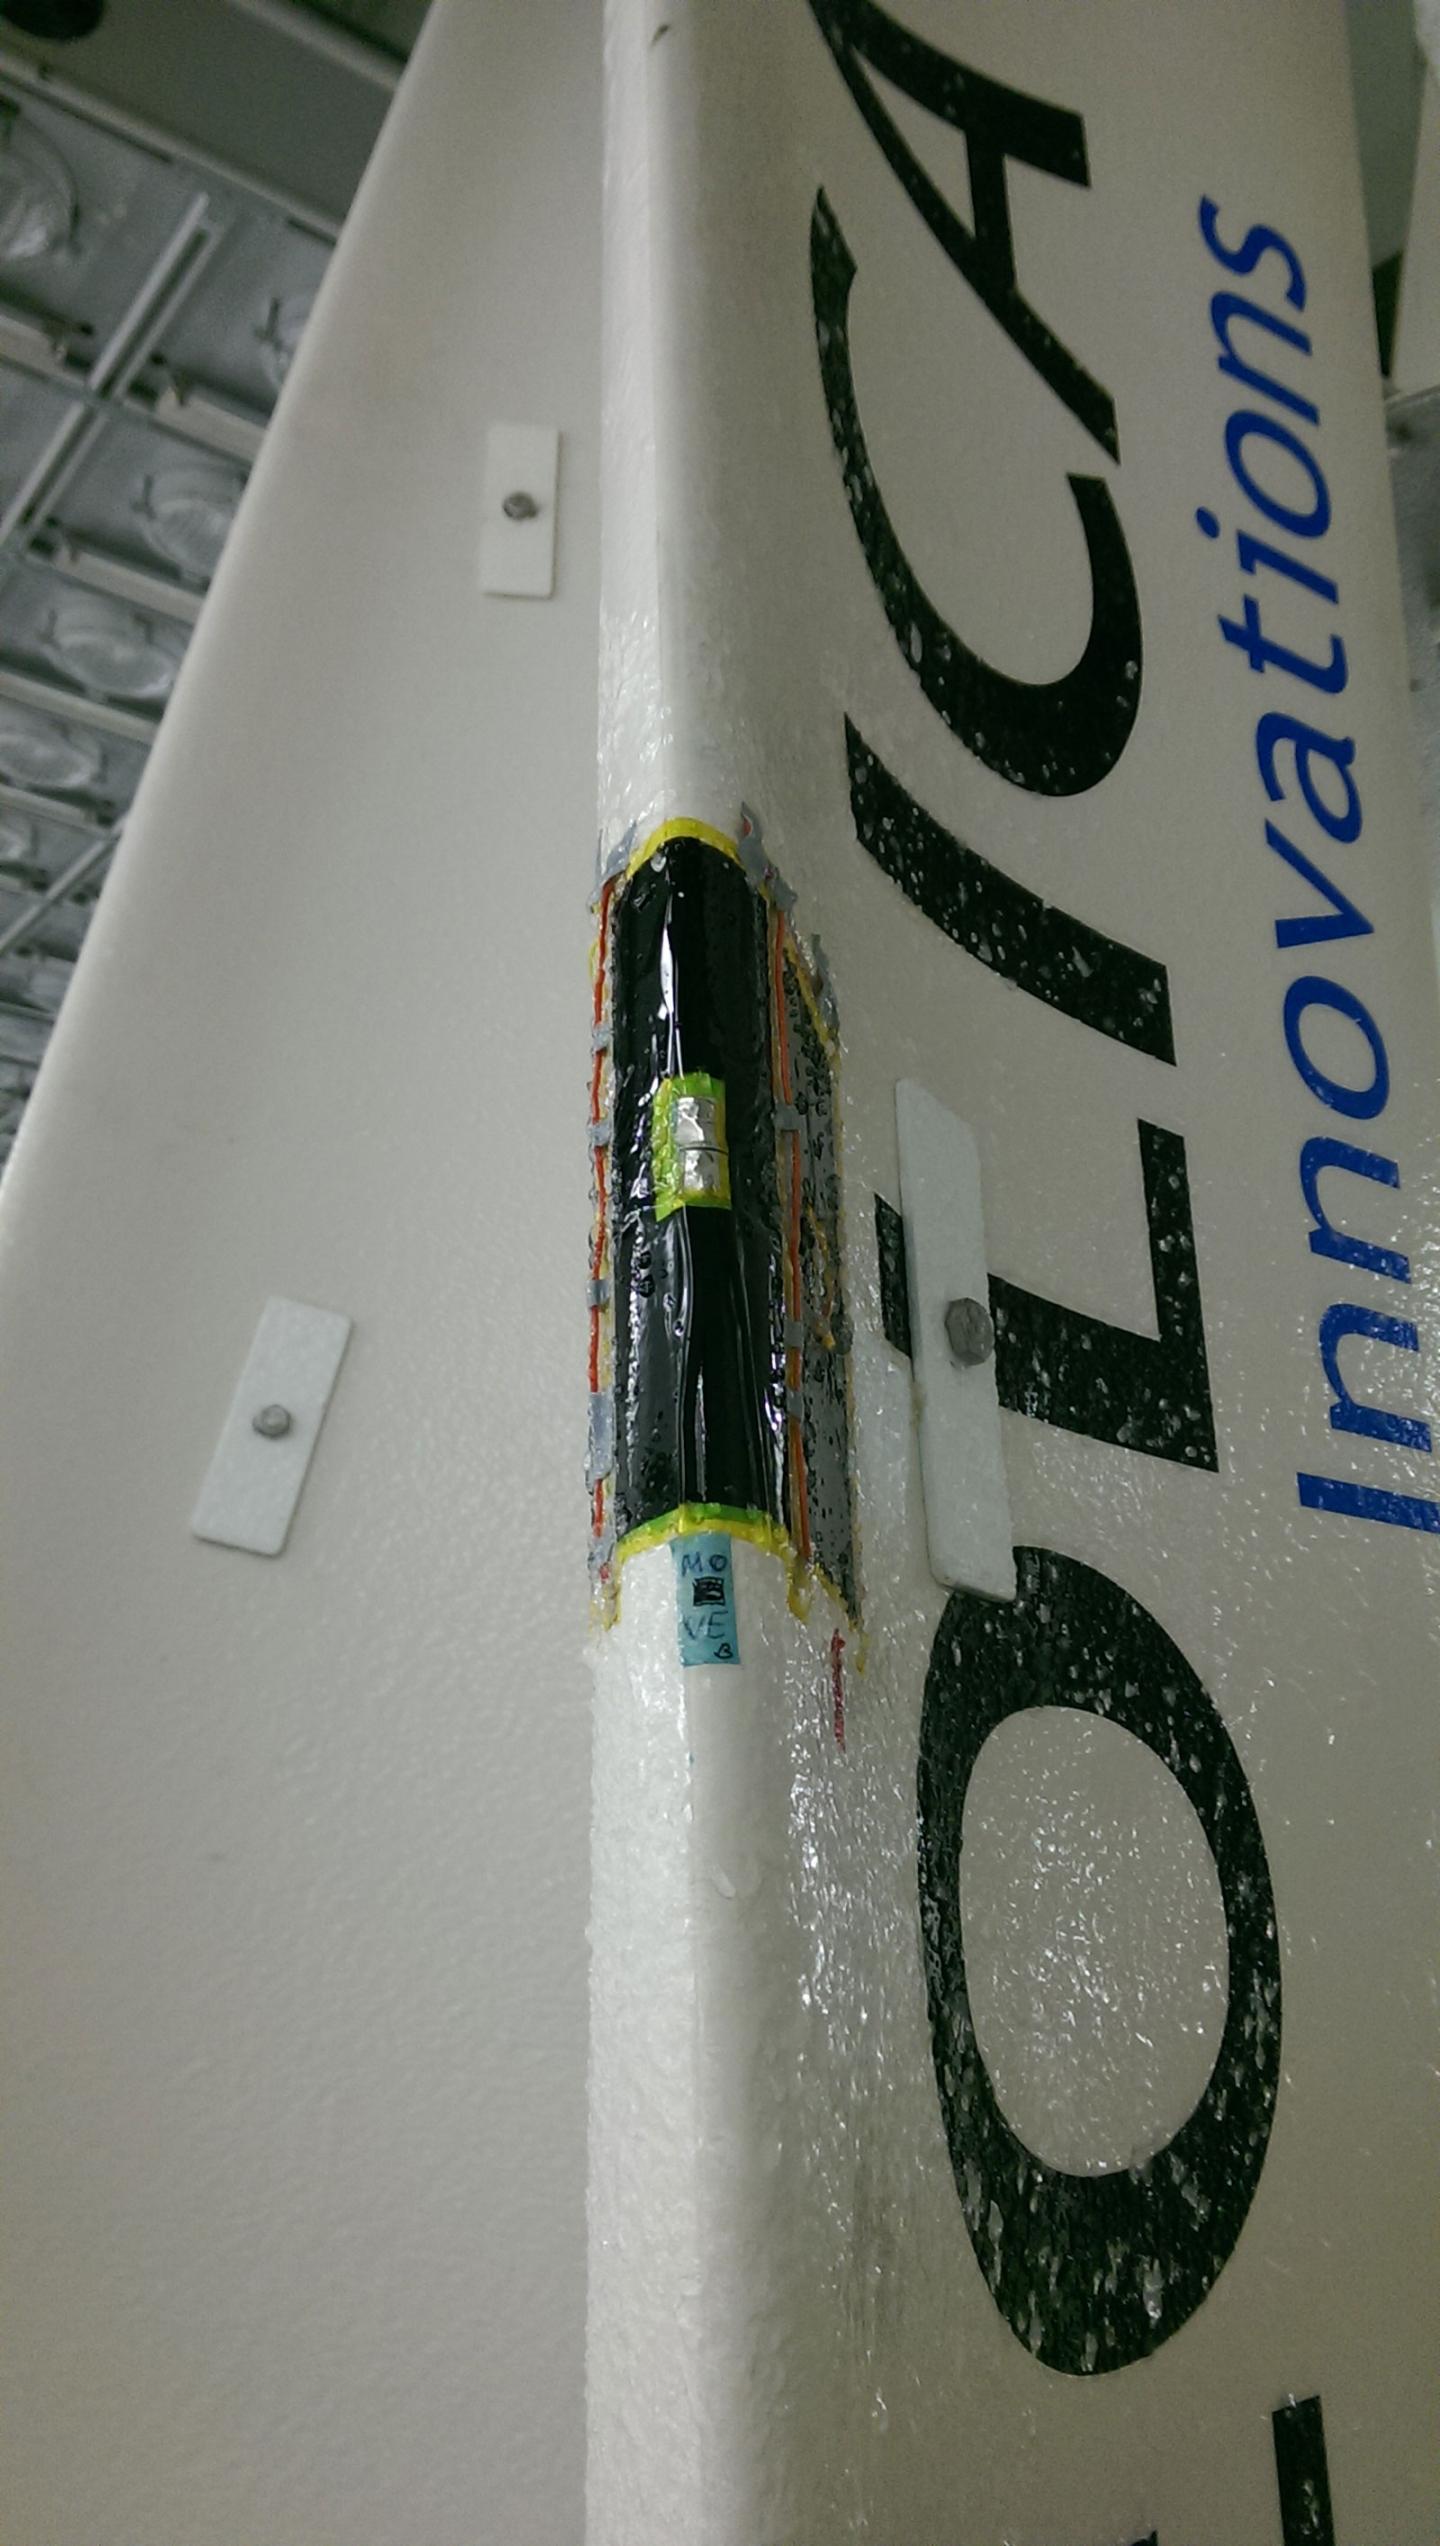 Smart Anti-Icing System for Rotor Blades